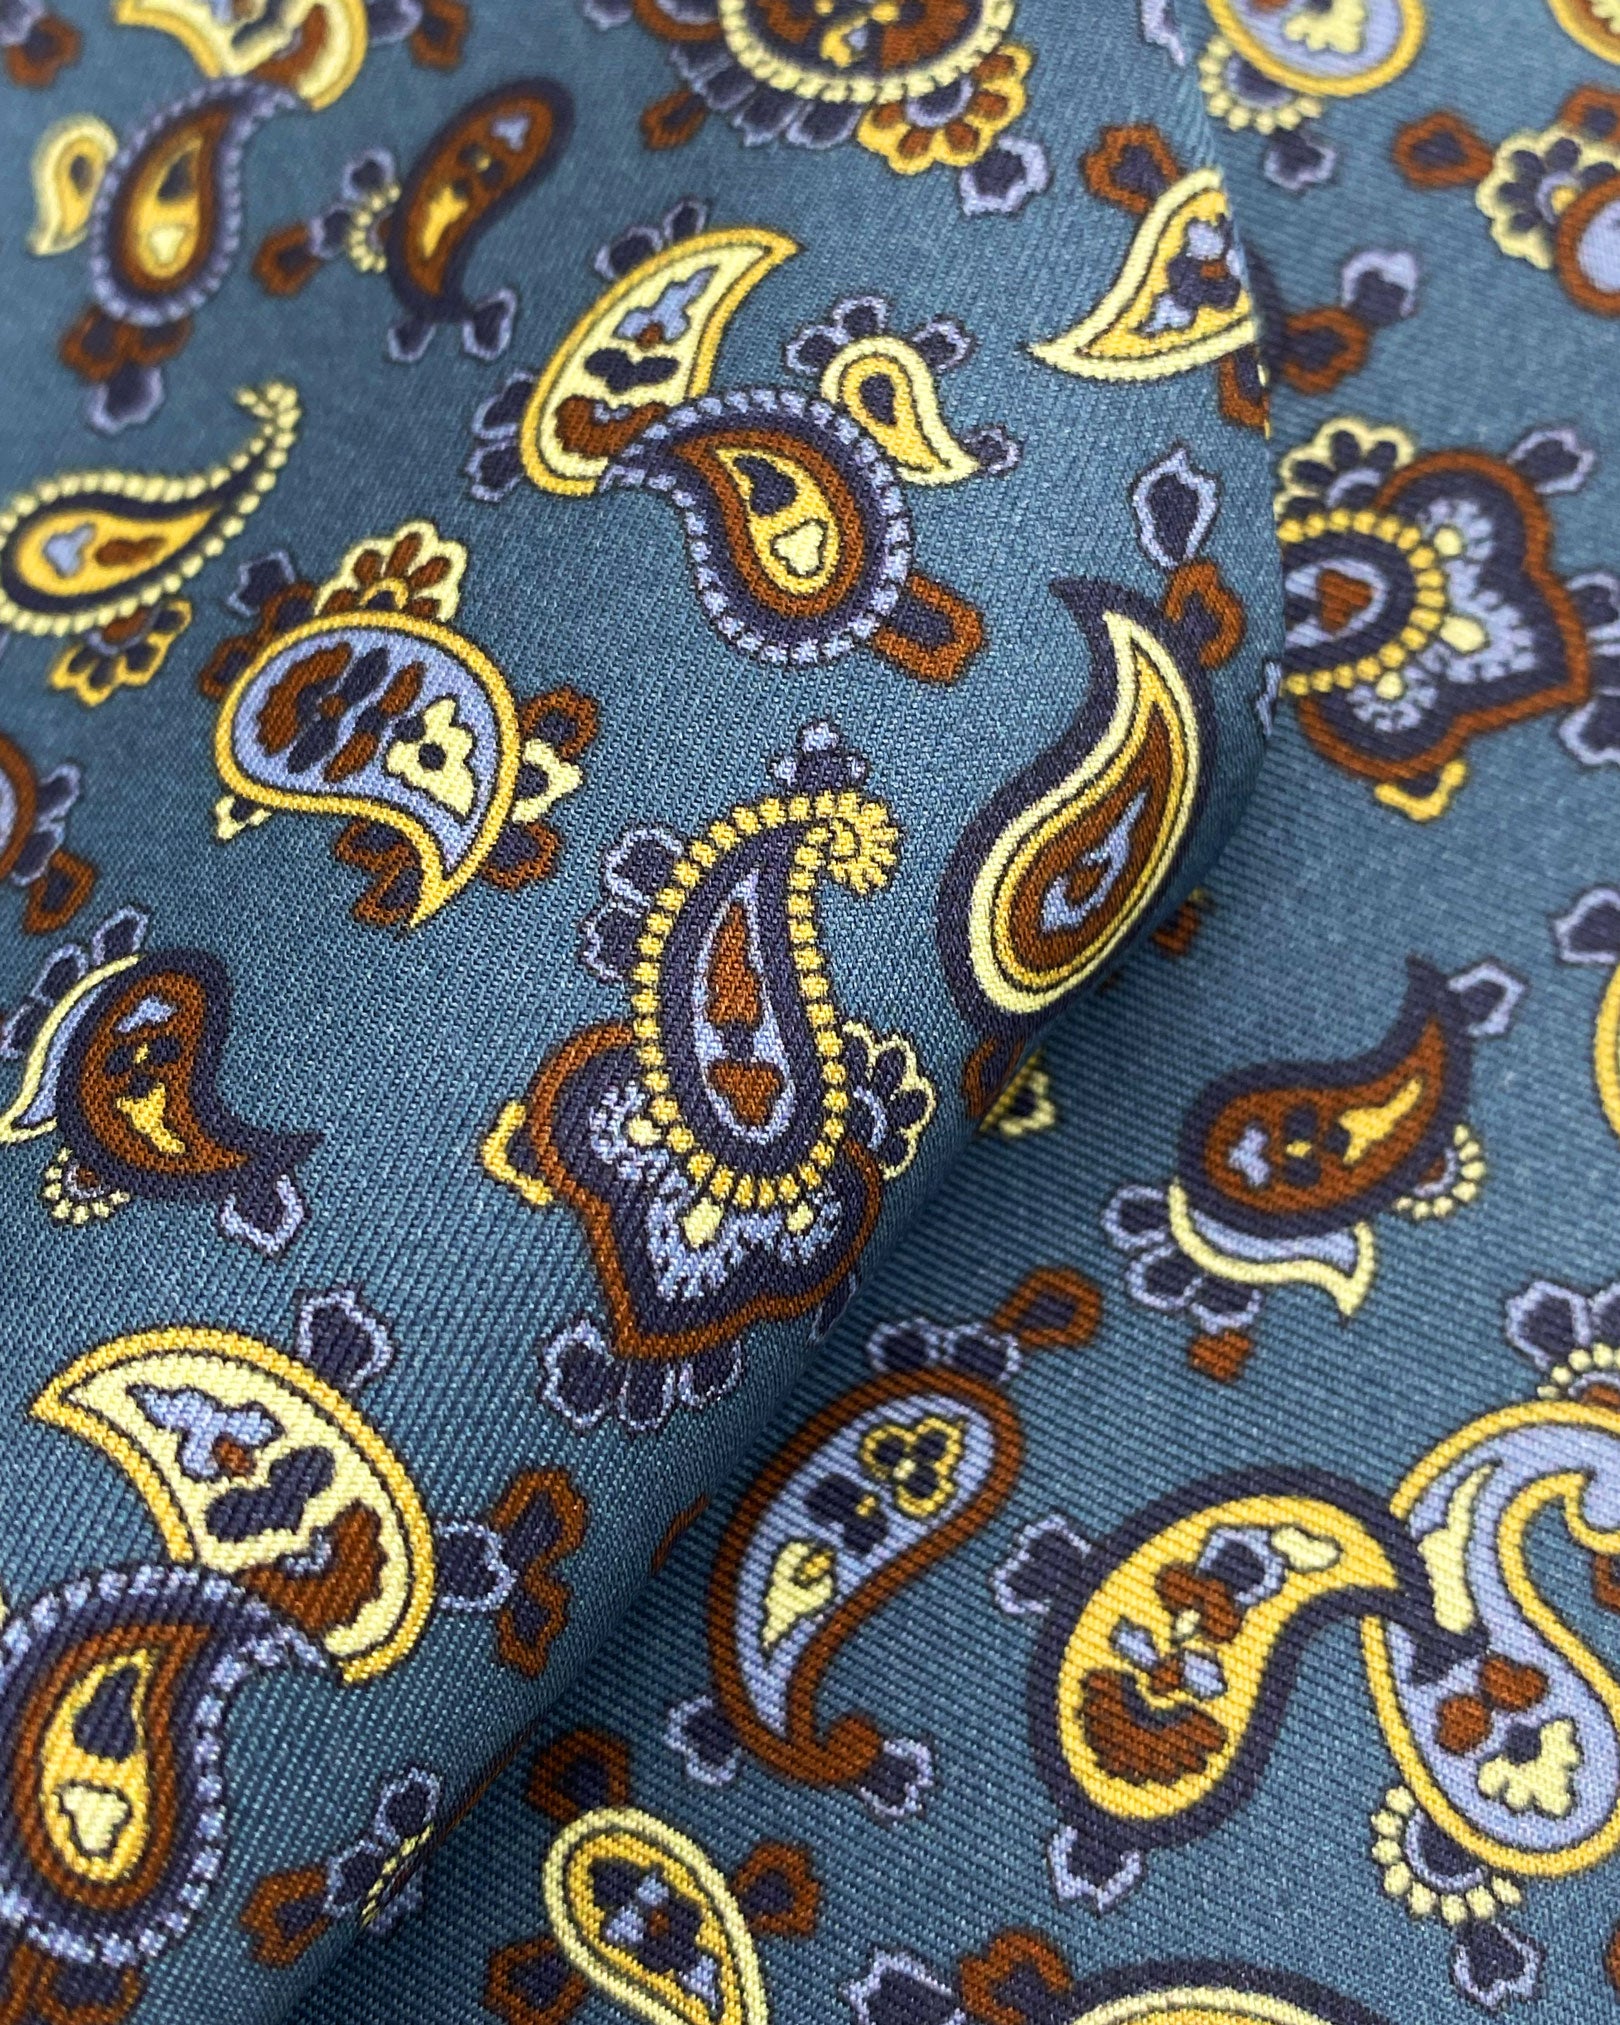 Ruffled close-up view of the Banff polyester scarf, presenting a closer view of theblue, black and lemon yellow paisley patterns.